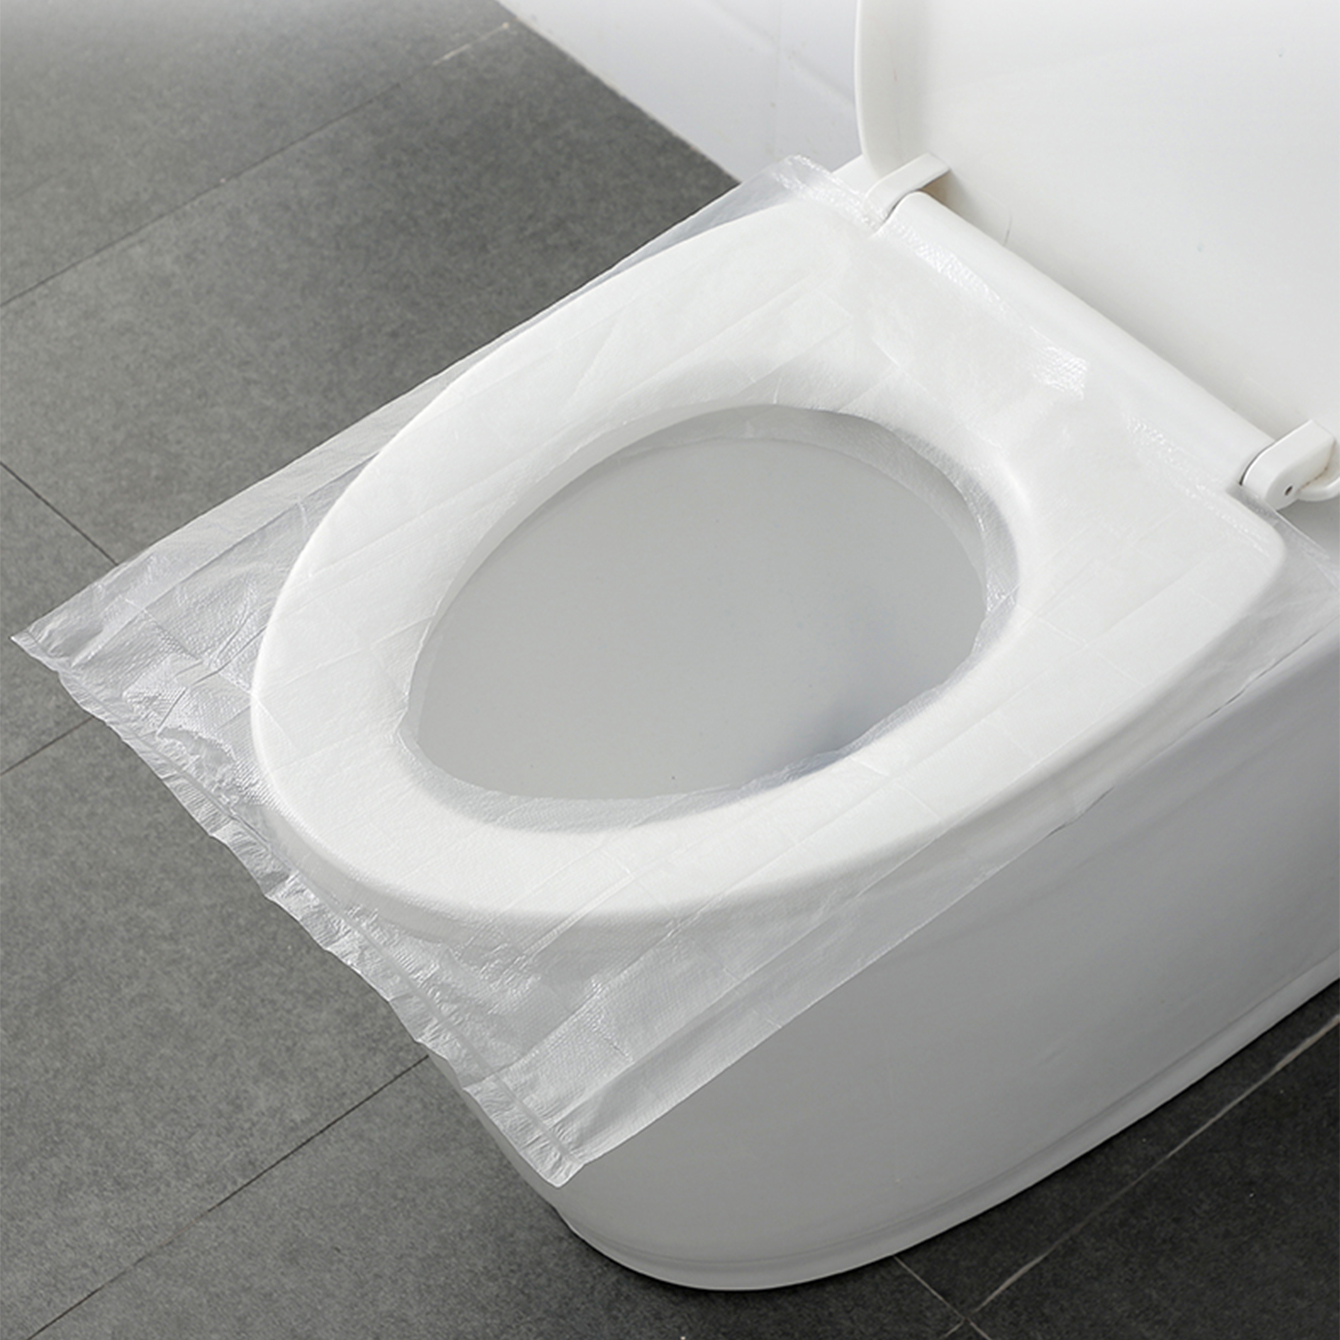 50 packs, Portable Toilet Cover - Waterproof Travel Toilet Mat with Cushion  Paper - Disposable and Convenient